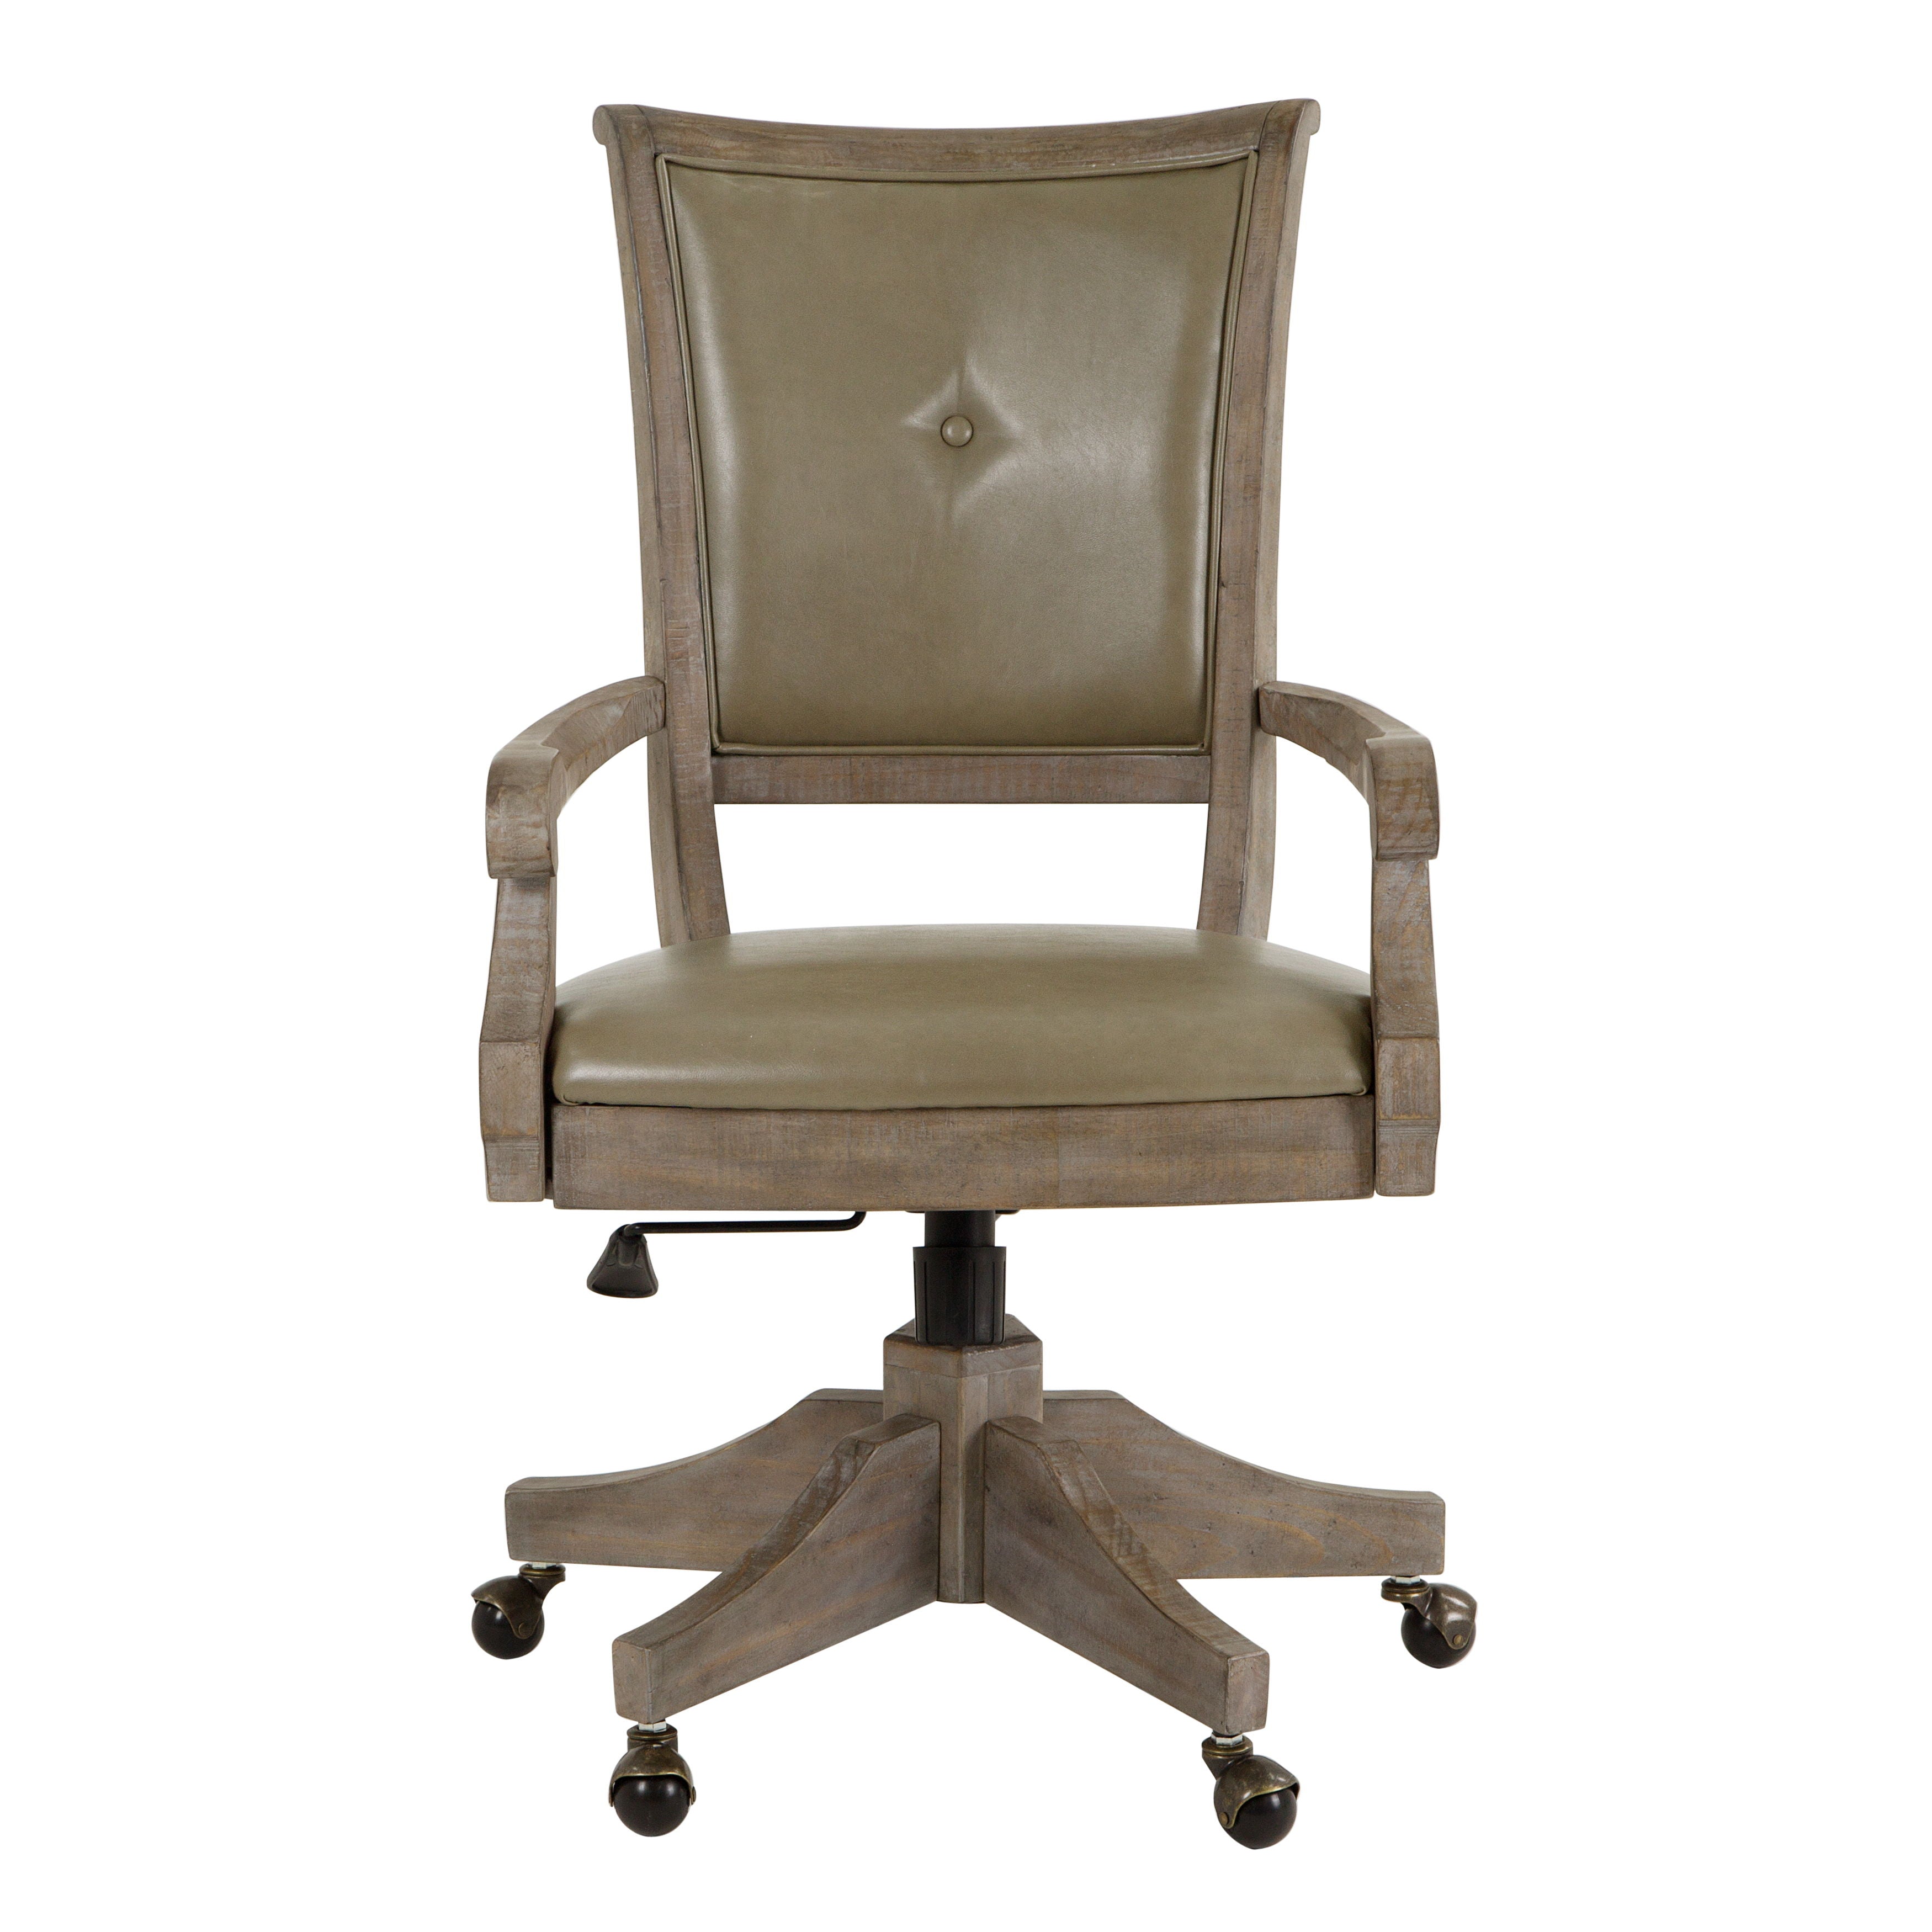 Lancaster - Fully Upholstered Swivel Chair - Dove Tail Grey